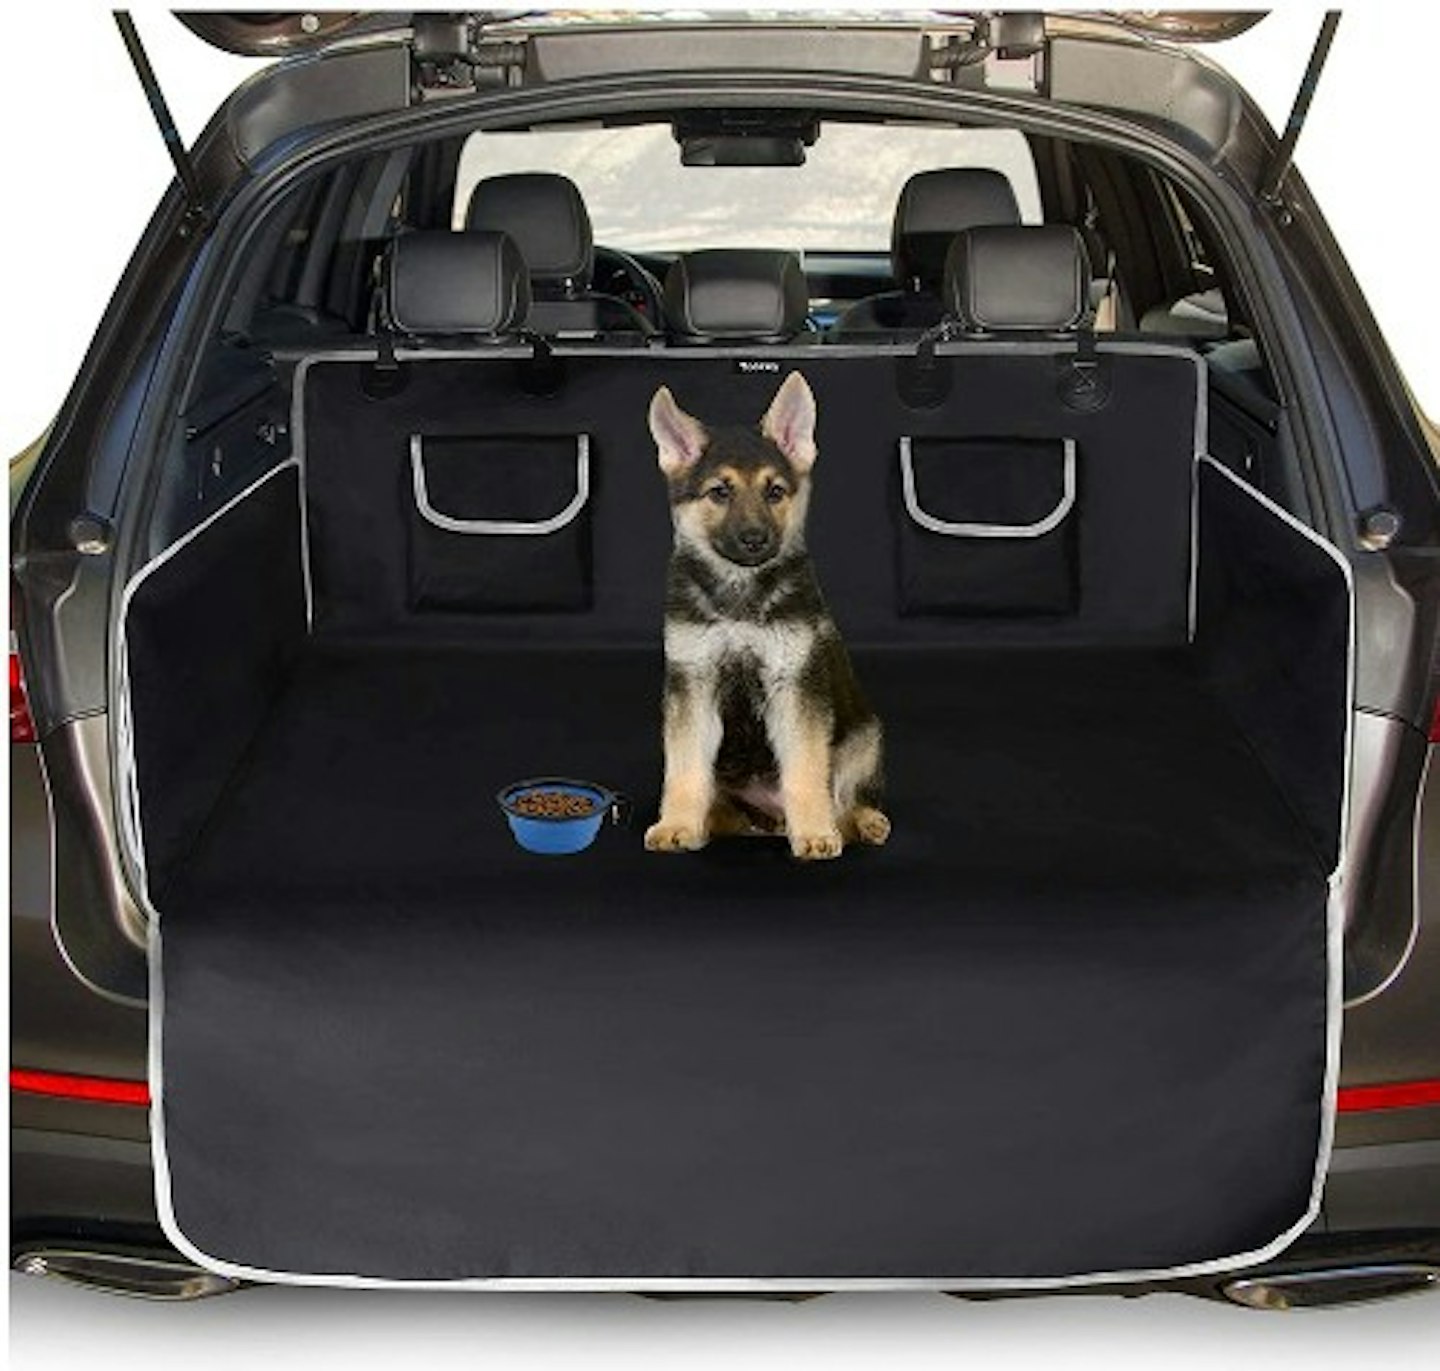 Toozey Car Boot Protector for Dog - Universal Nonslip Car Boot Liner Protector with Side Protection and Bumper Protection,